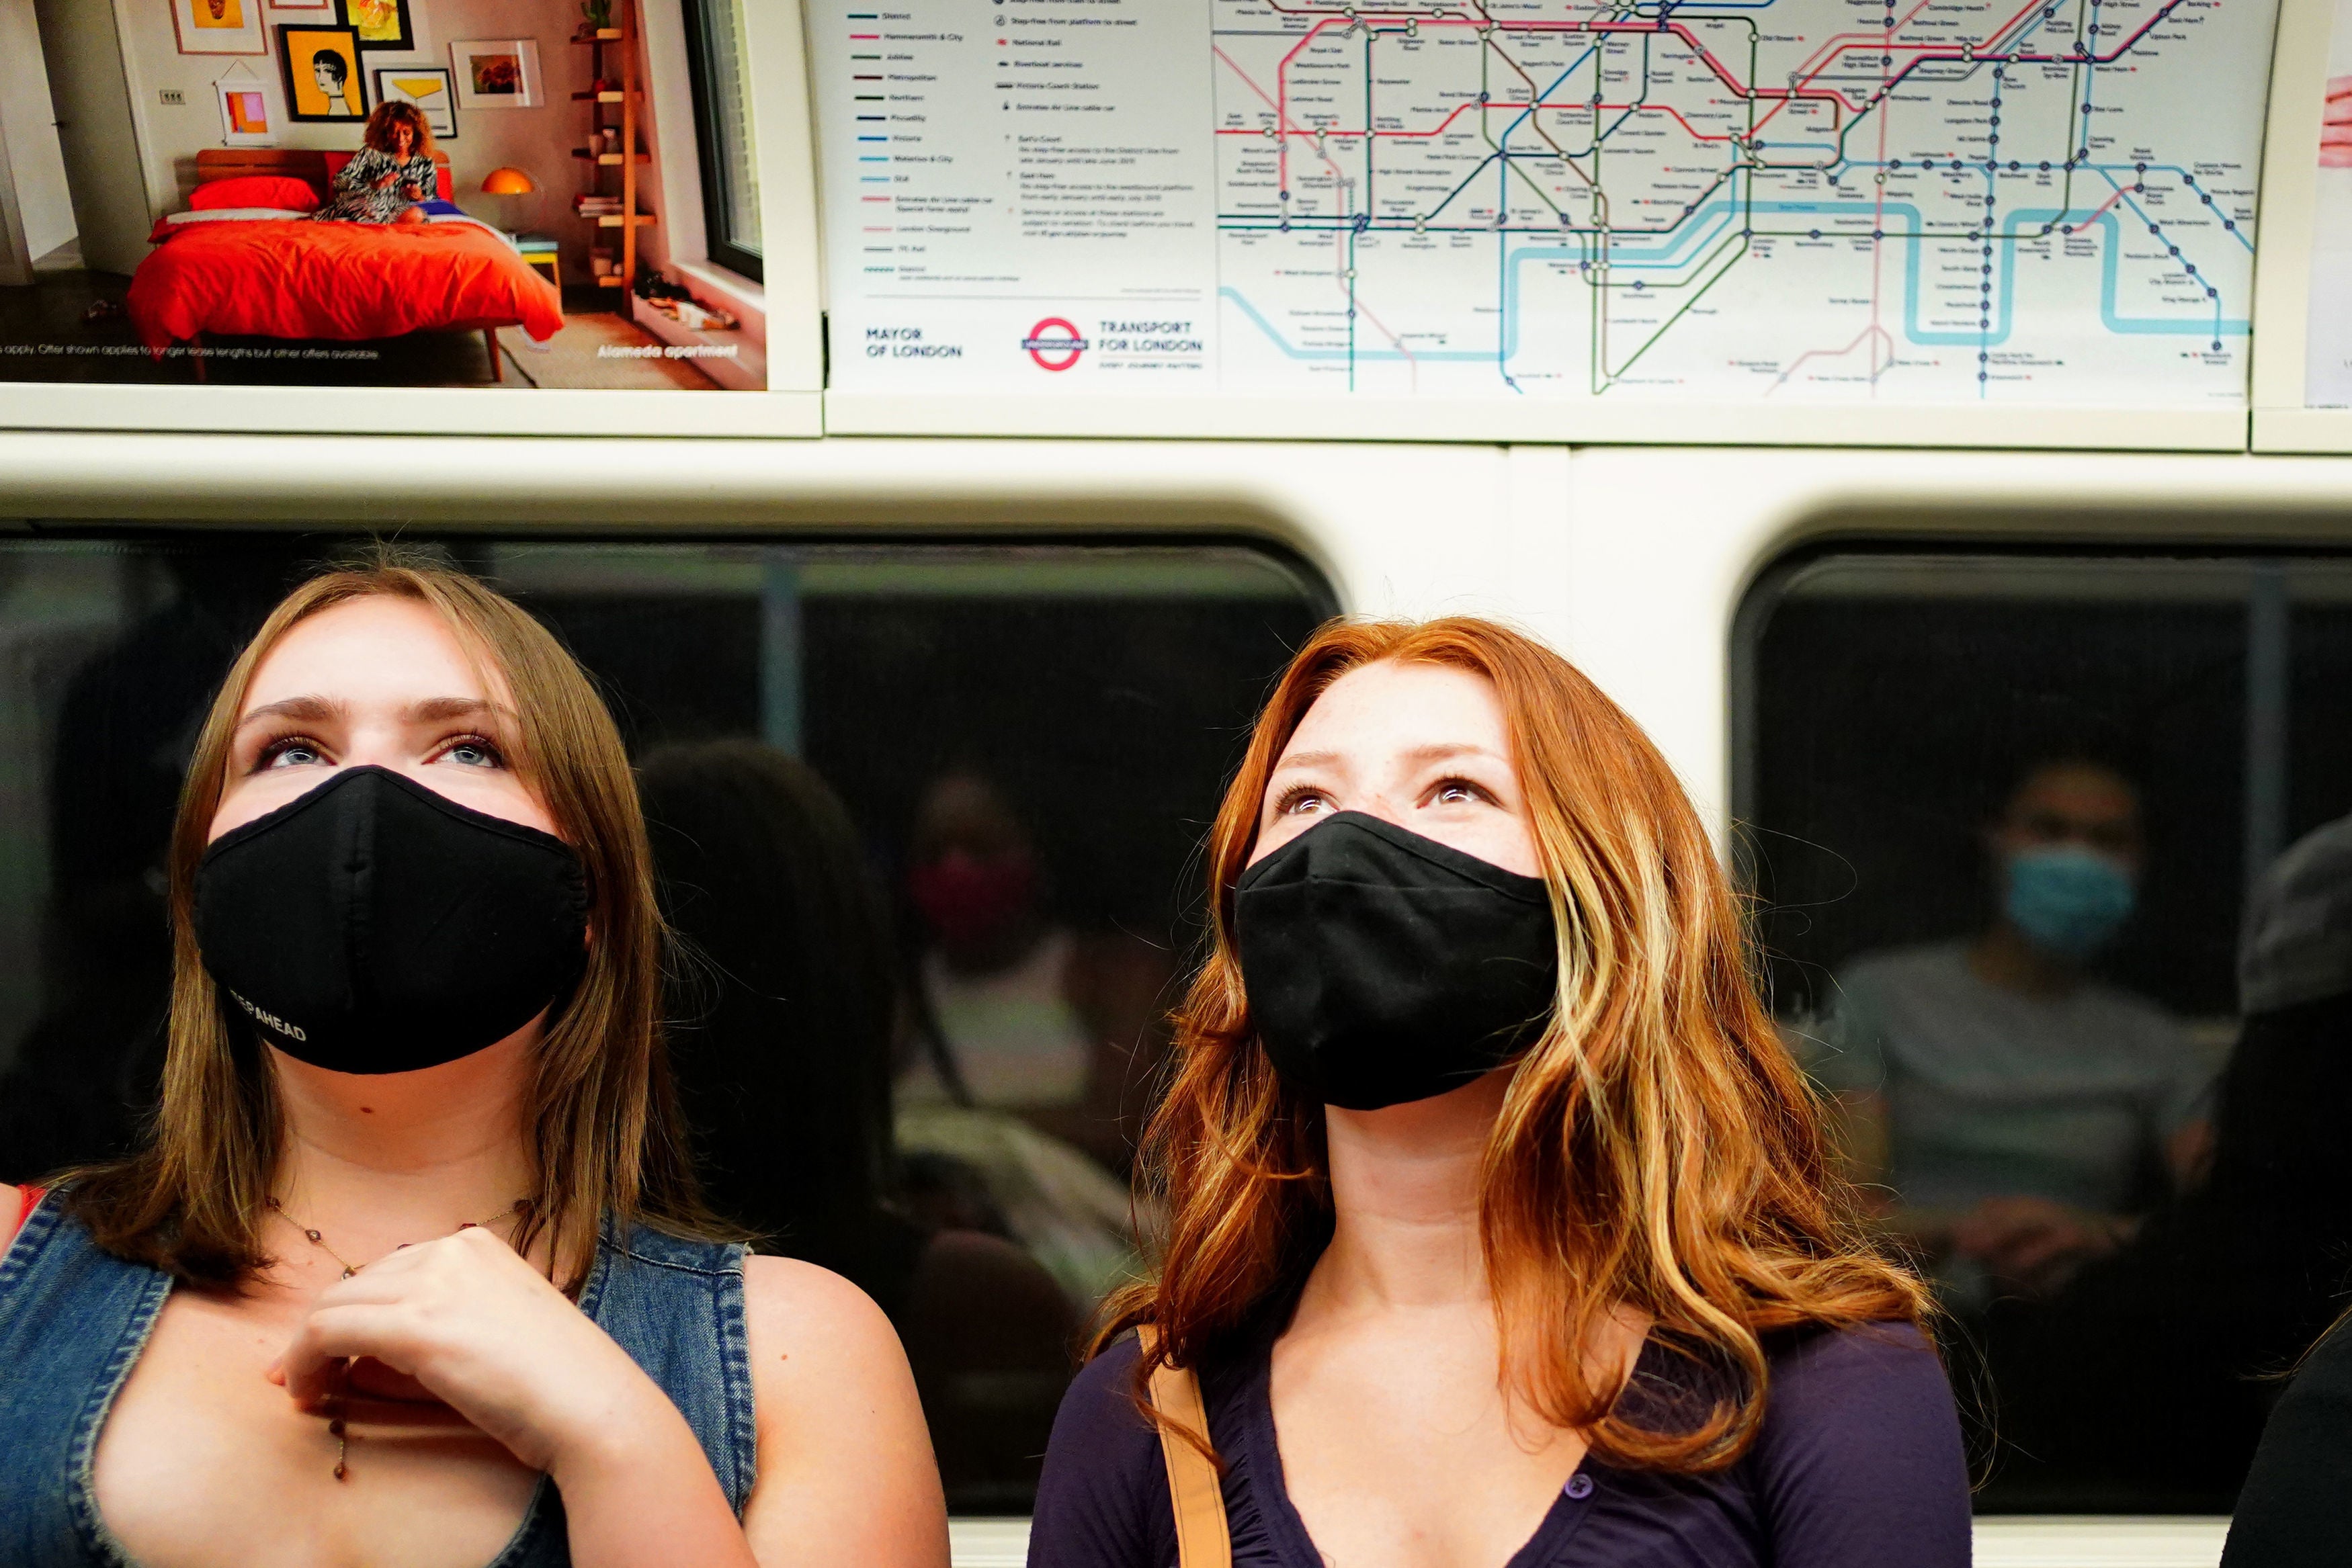 Masks will no longer be compulsory in public places under government plans later this month